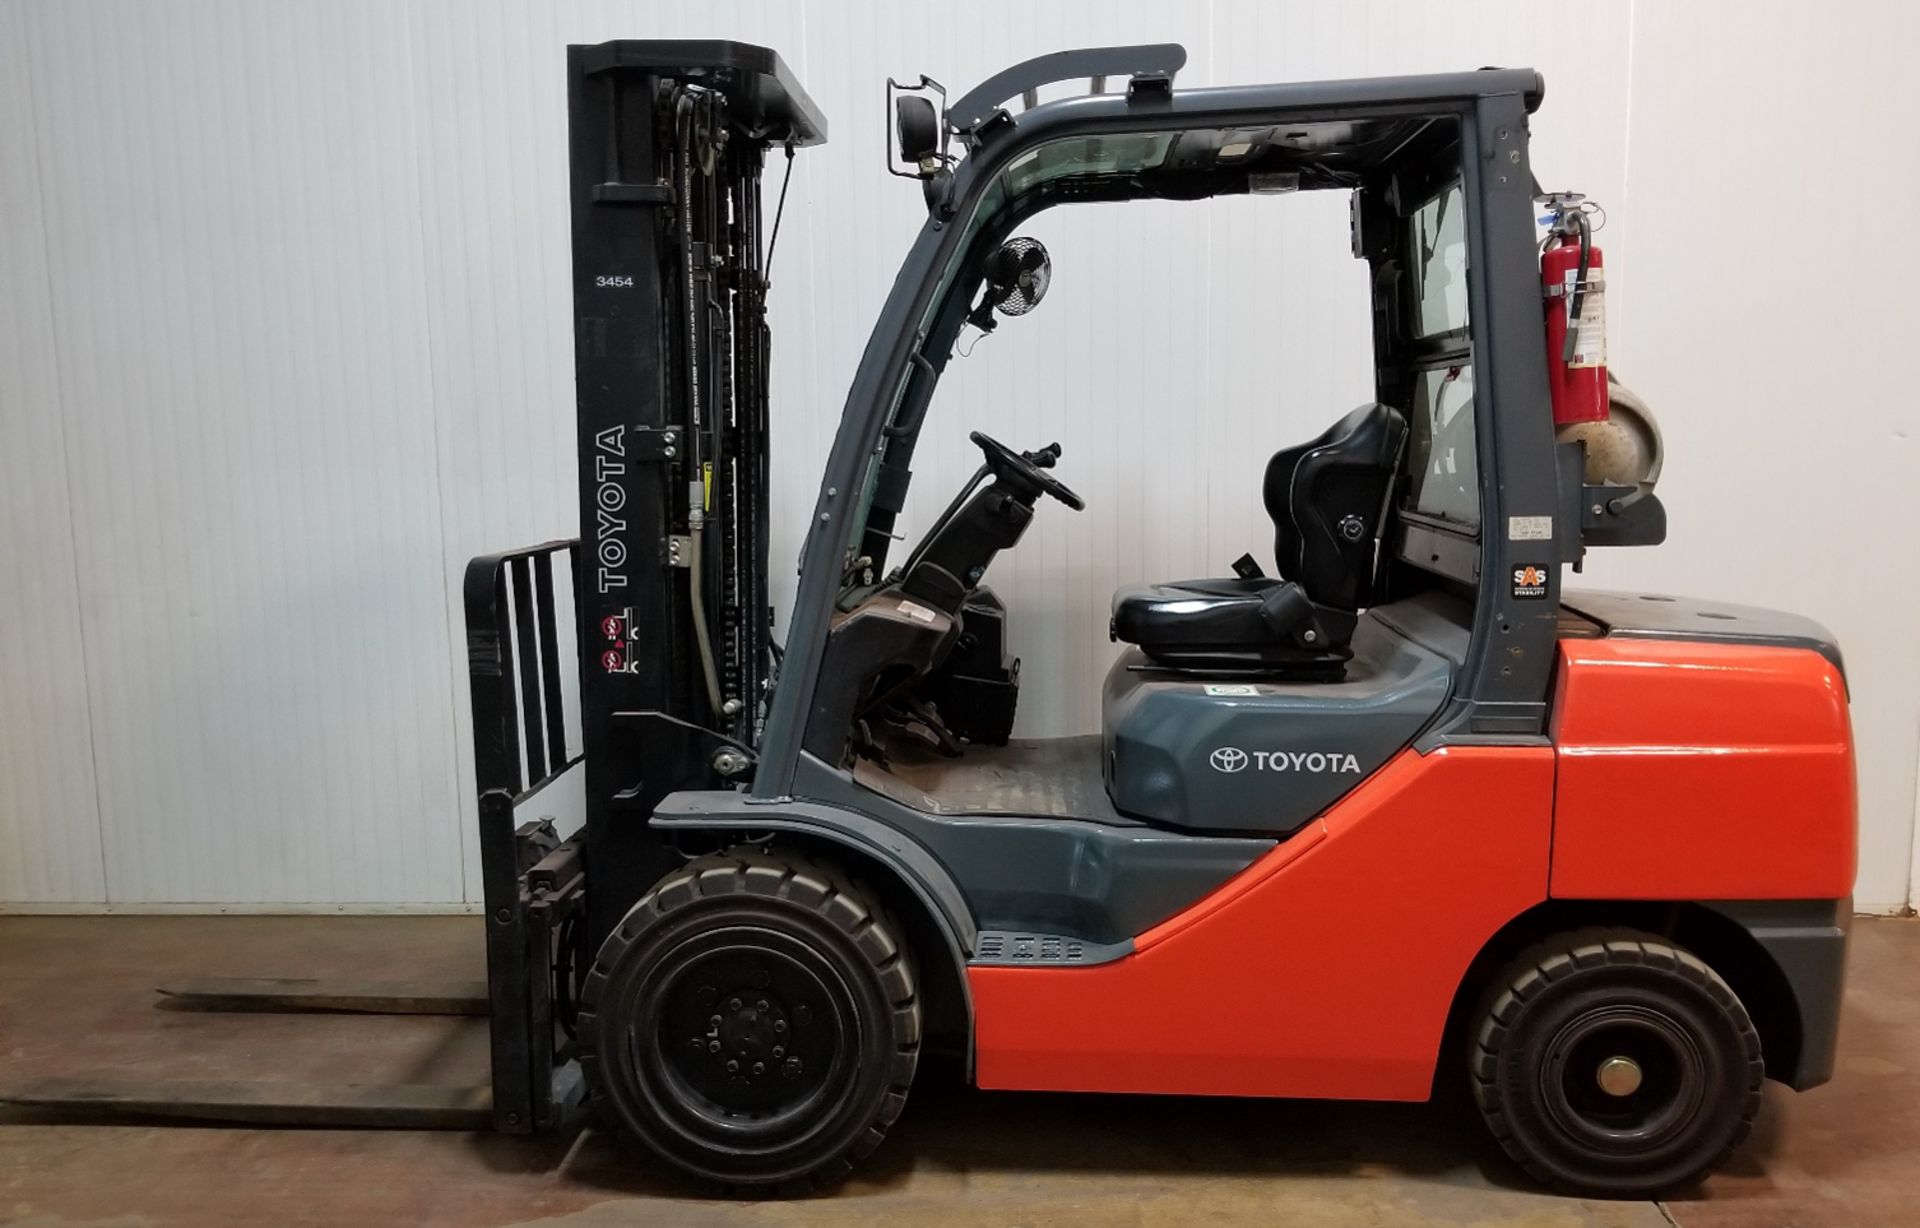 TOYOTA (2013) 8FGU32 6,500 LB. CAPACITY LPG FORKLIFT WITH 187" MAX. LIFT HEIGHT, 3-STAGE MAST, - Image 2 of 2